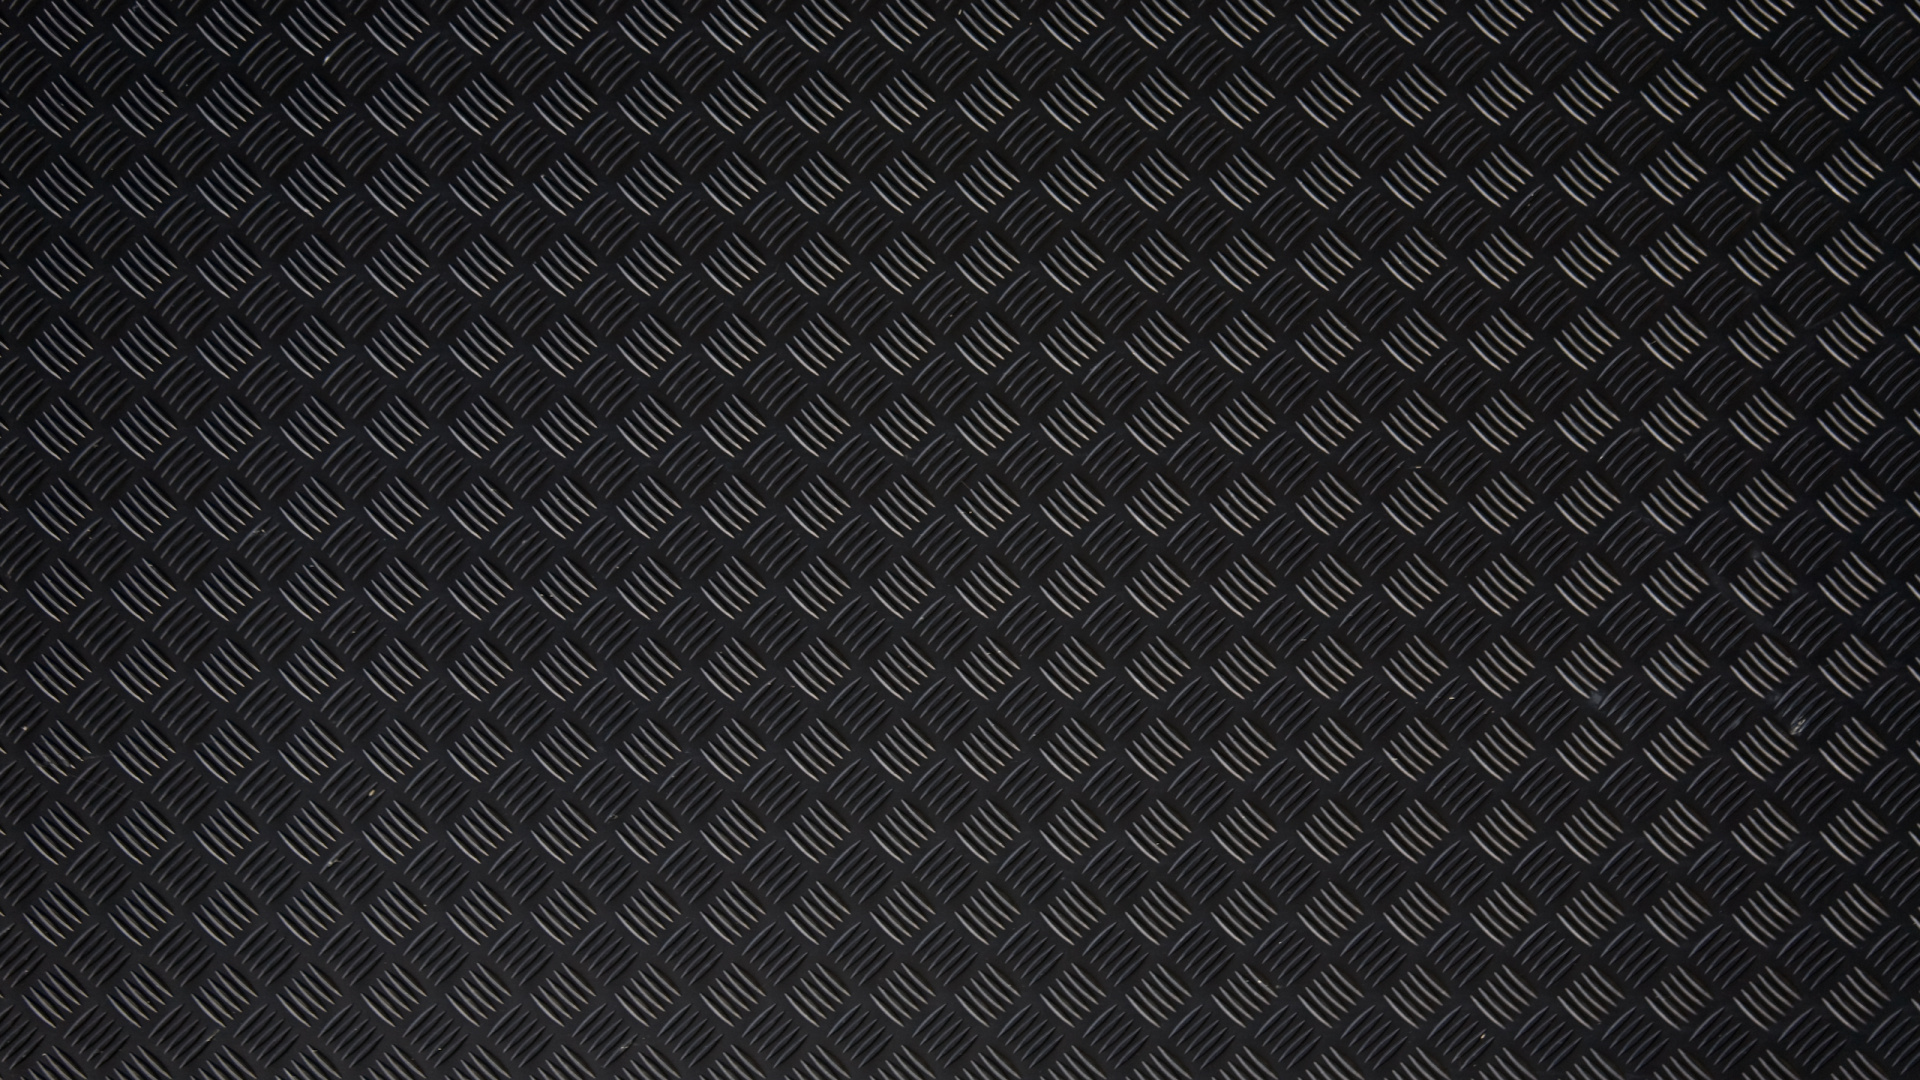 Blue and White Checkered Textile. Wallpaper in 1920x1080 Resolution